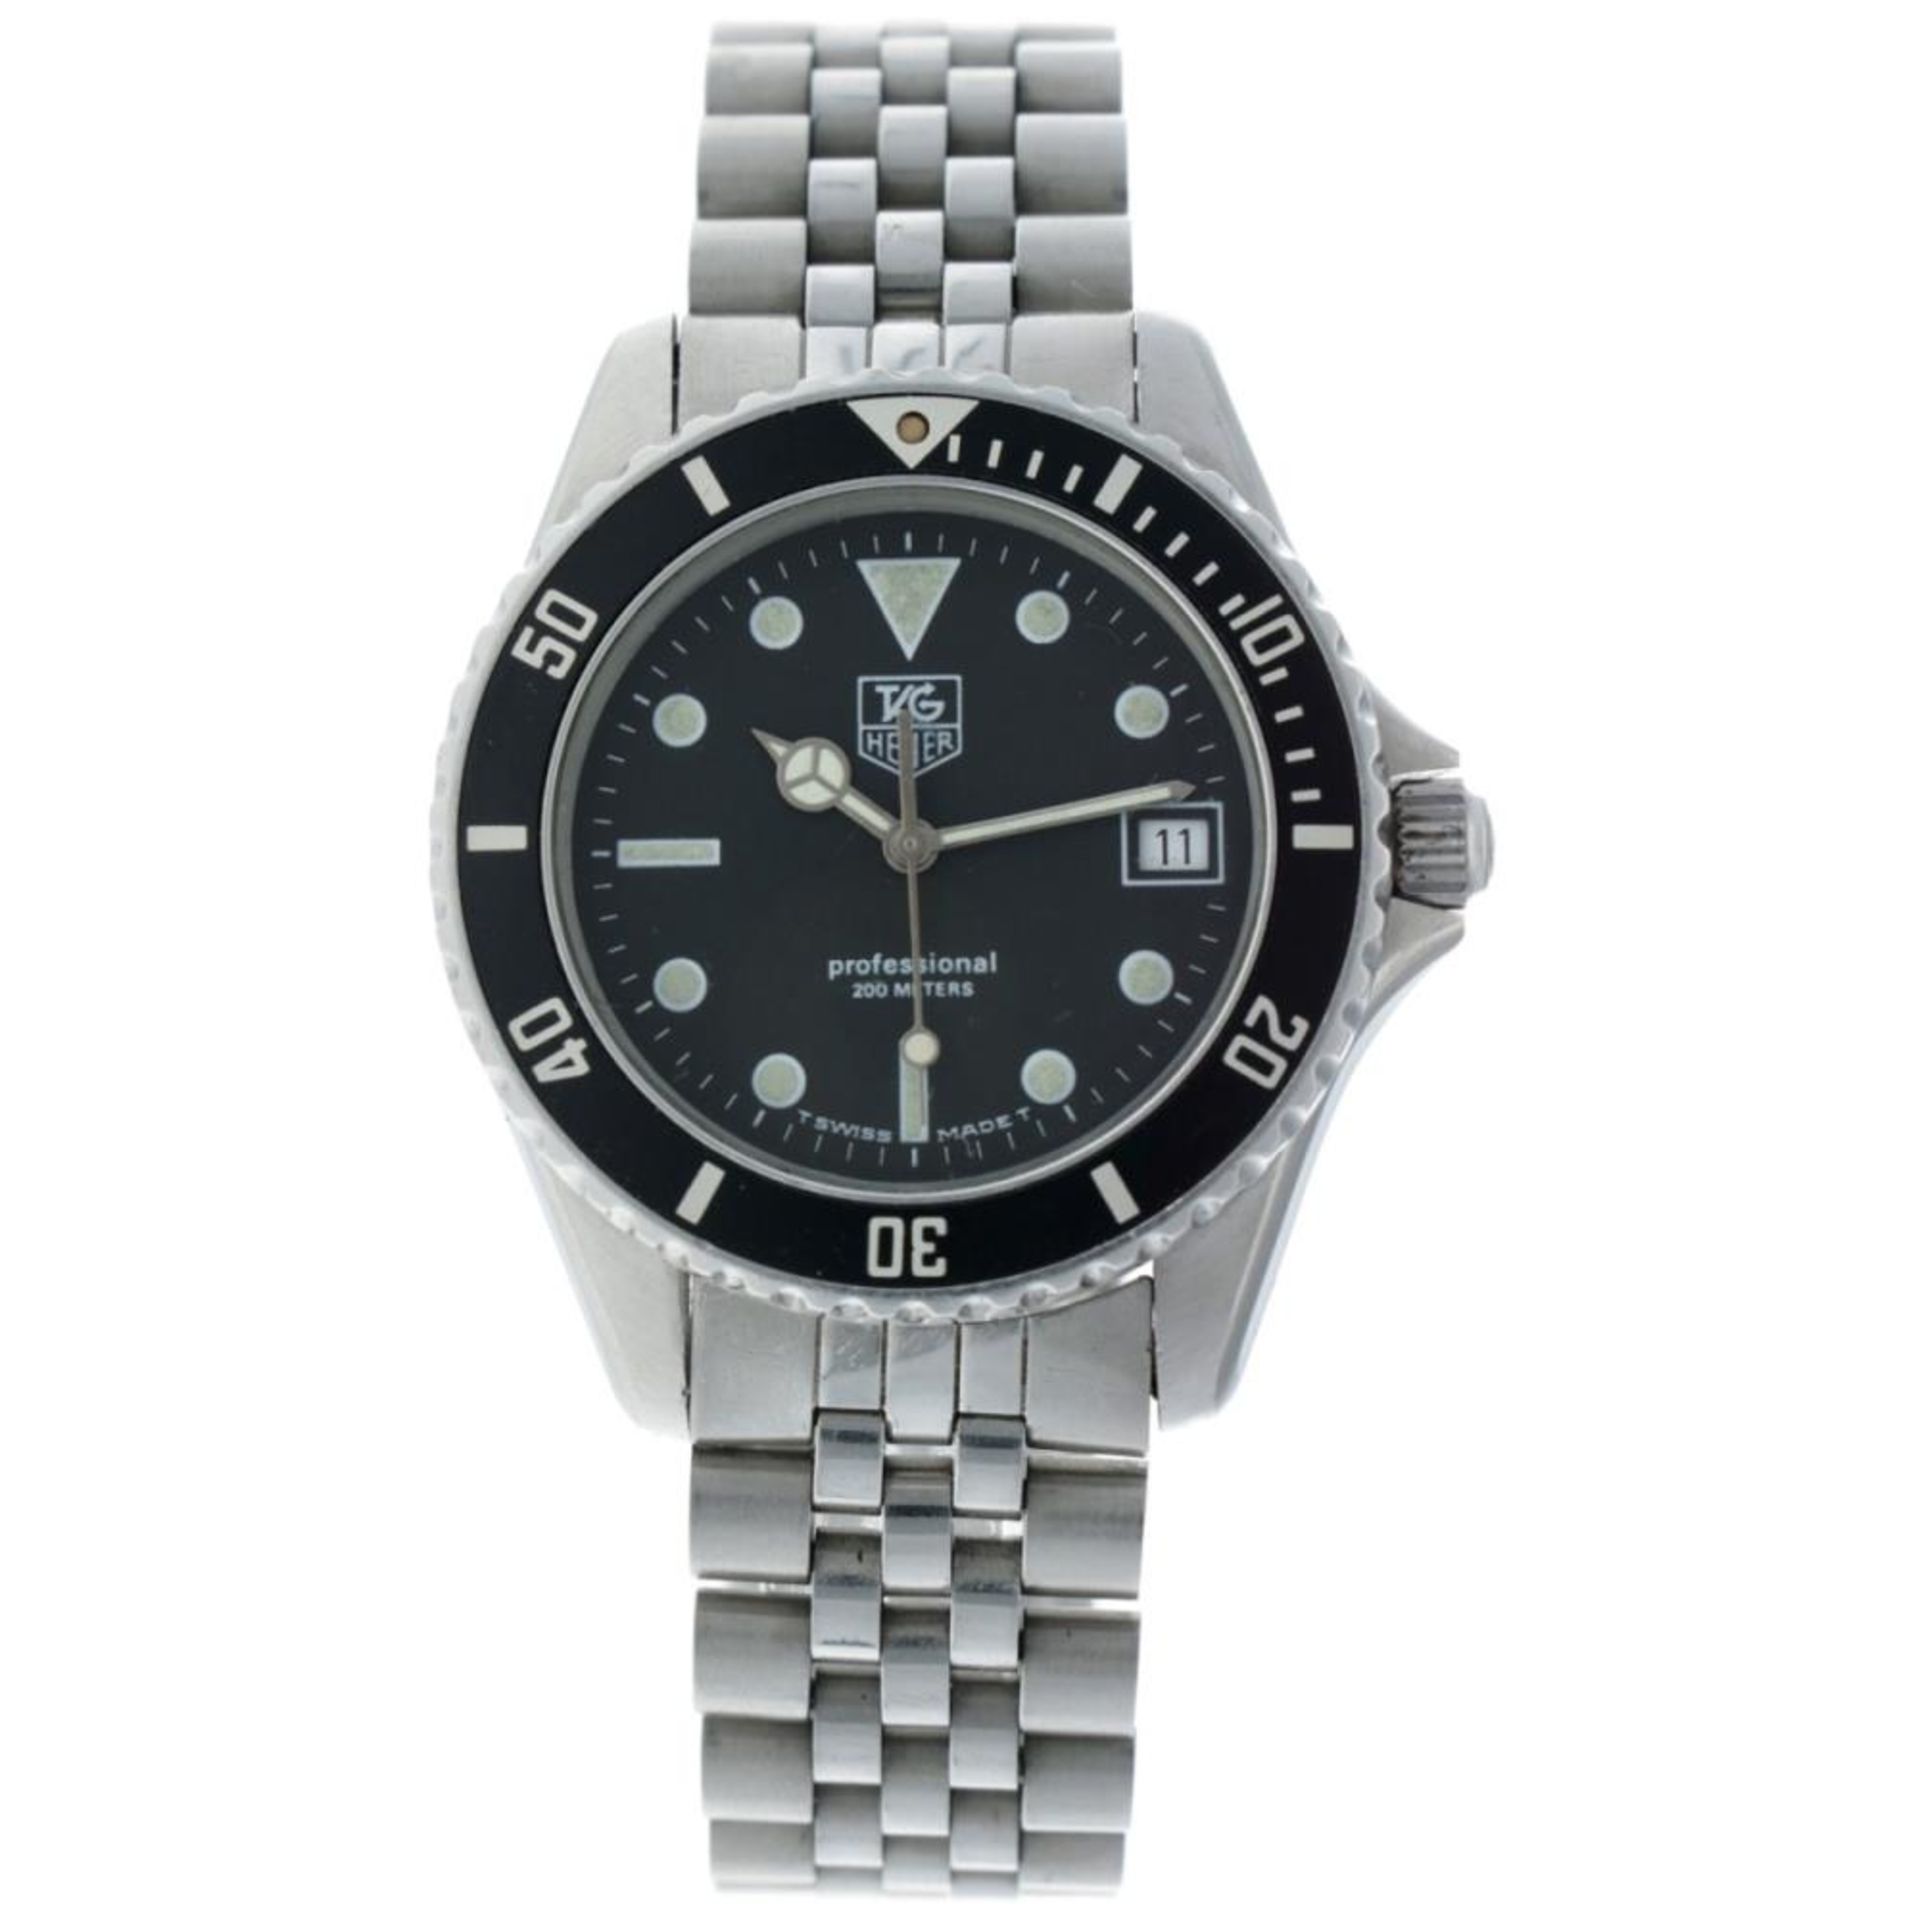 TAG Heuer Professional 200 980.013 - Men's watch - approx. 1985.